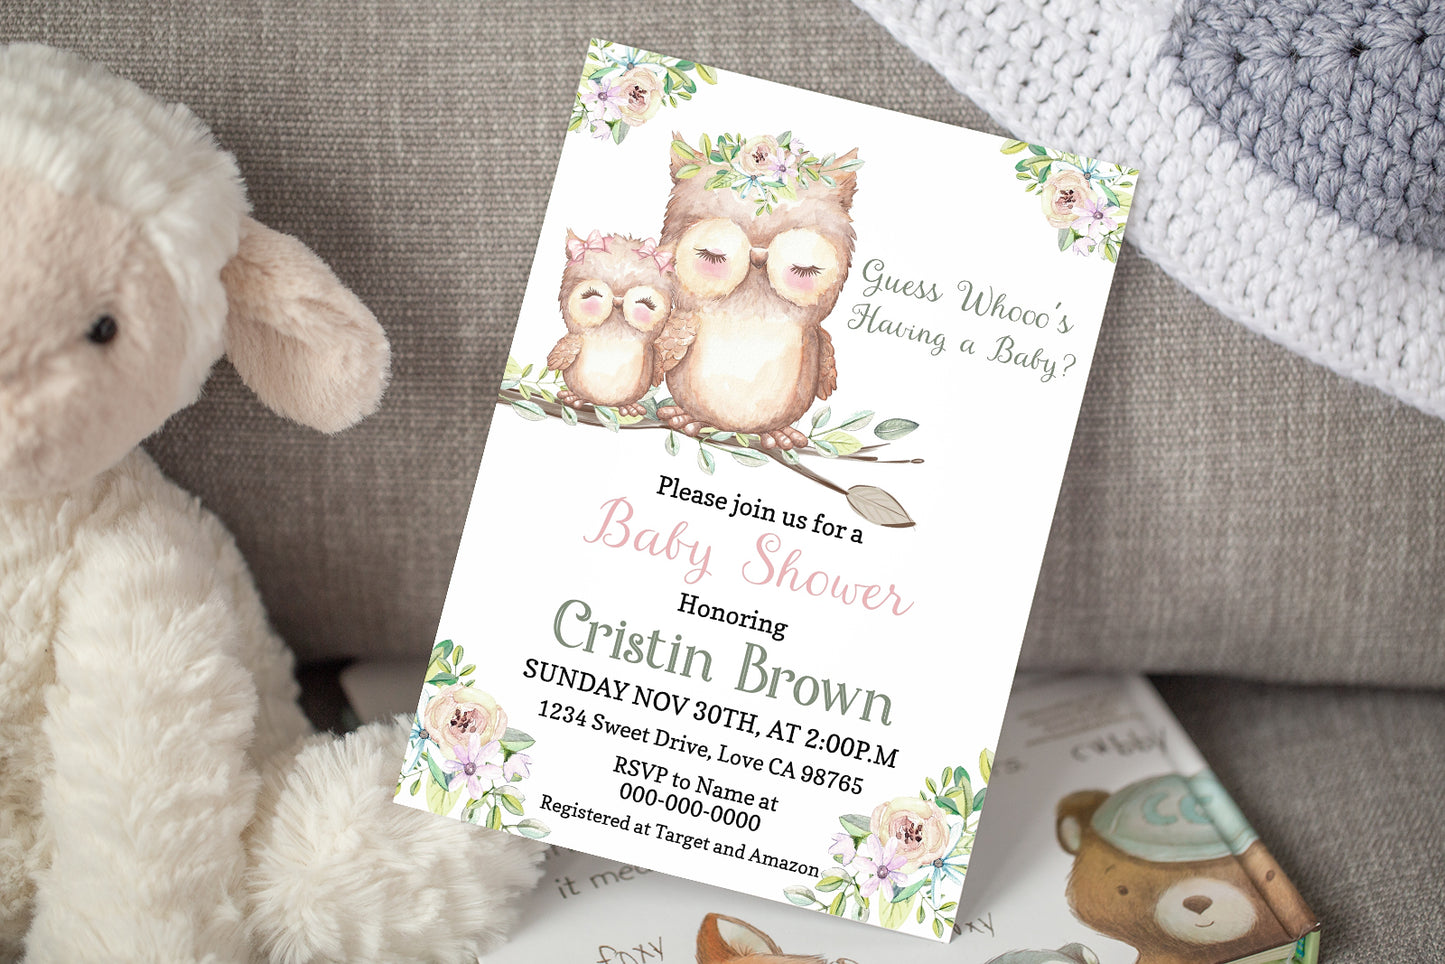 Guess Whoo's Having A Baby Invitation | Editable Owl Girl Baby Shower Invite - 78A